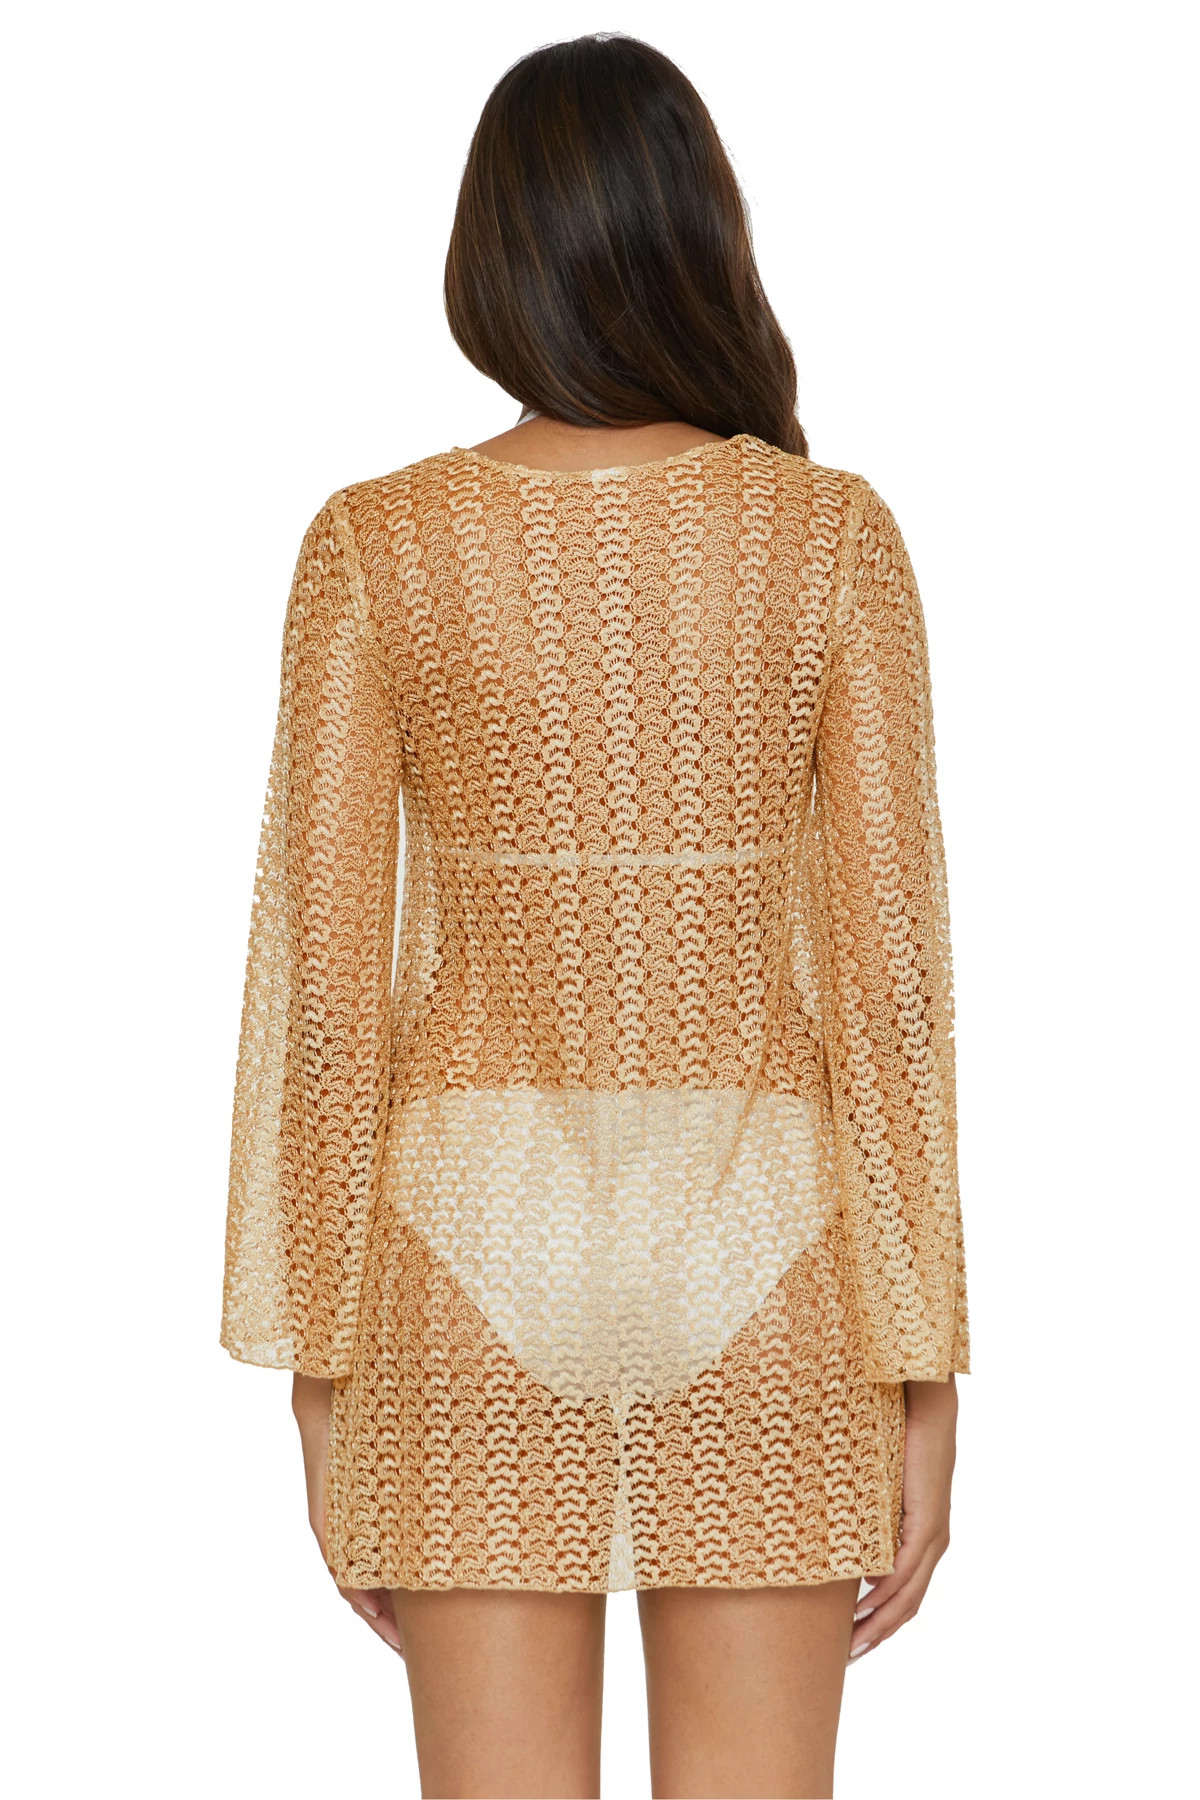 GOLD Crochet Tunic image number 2